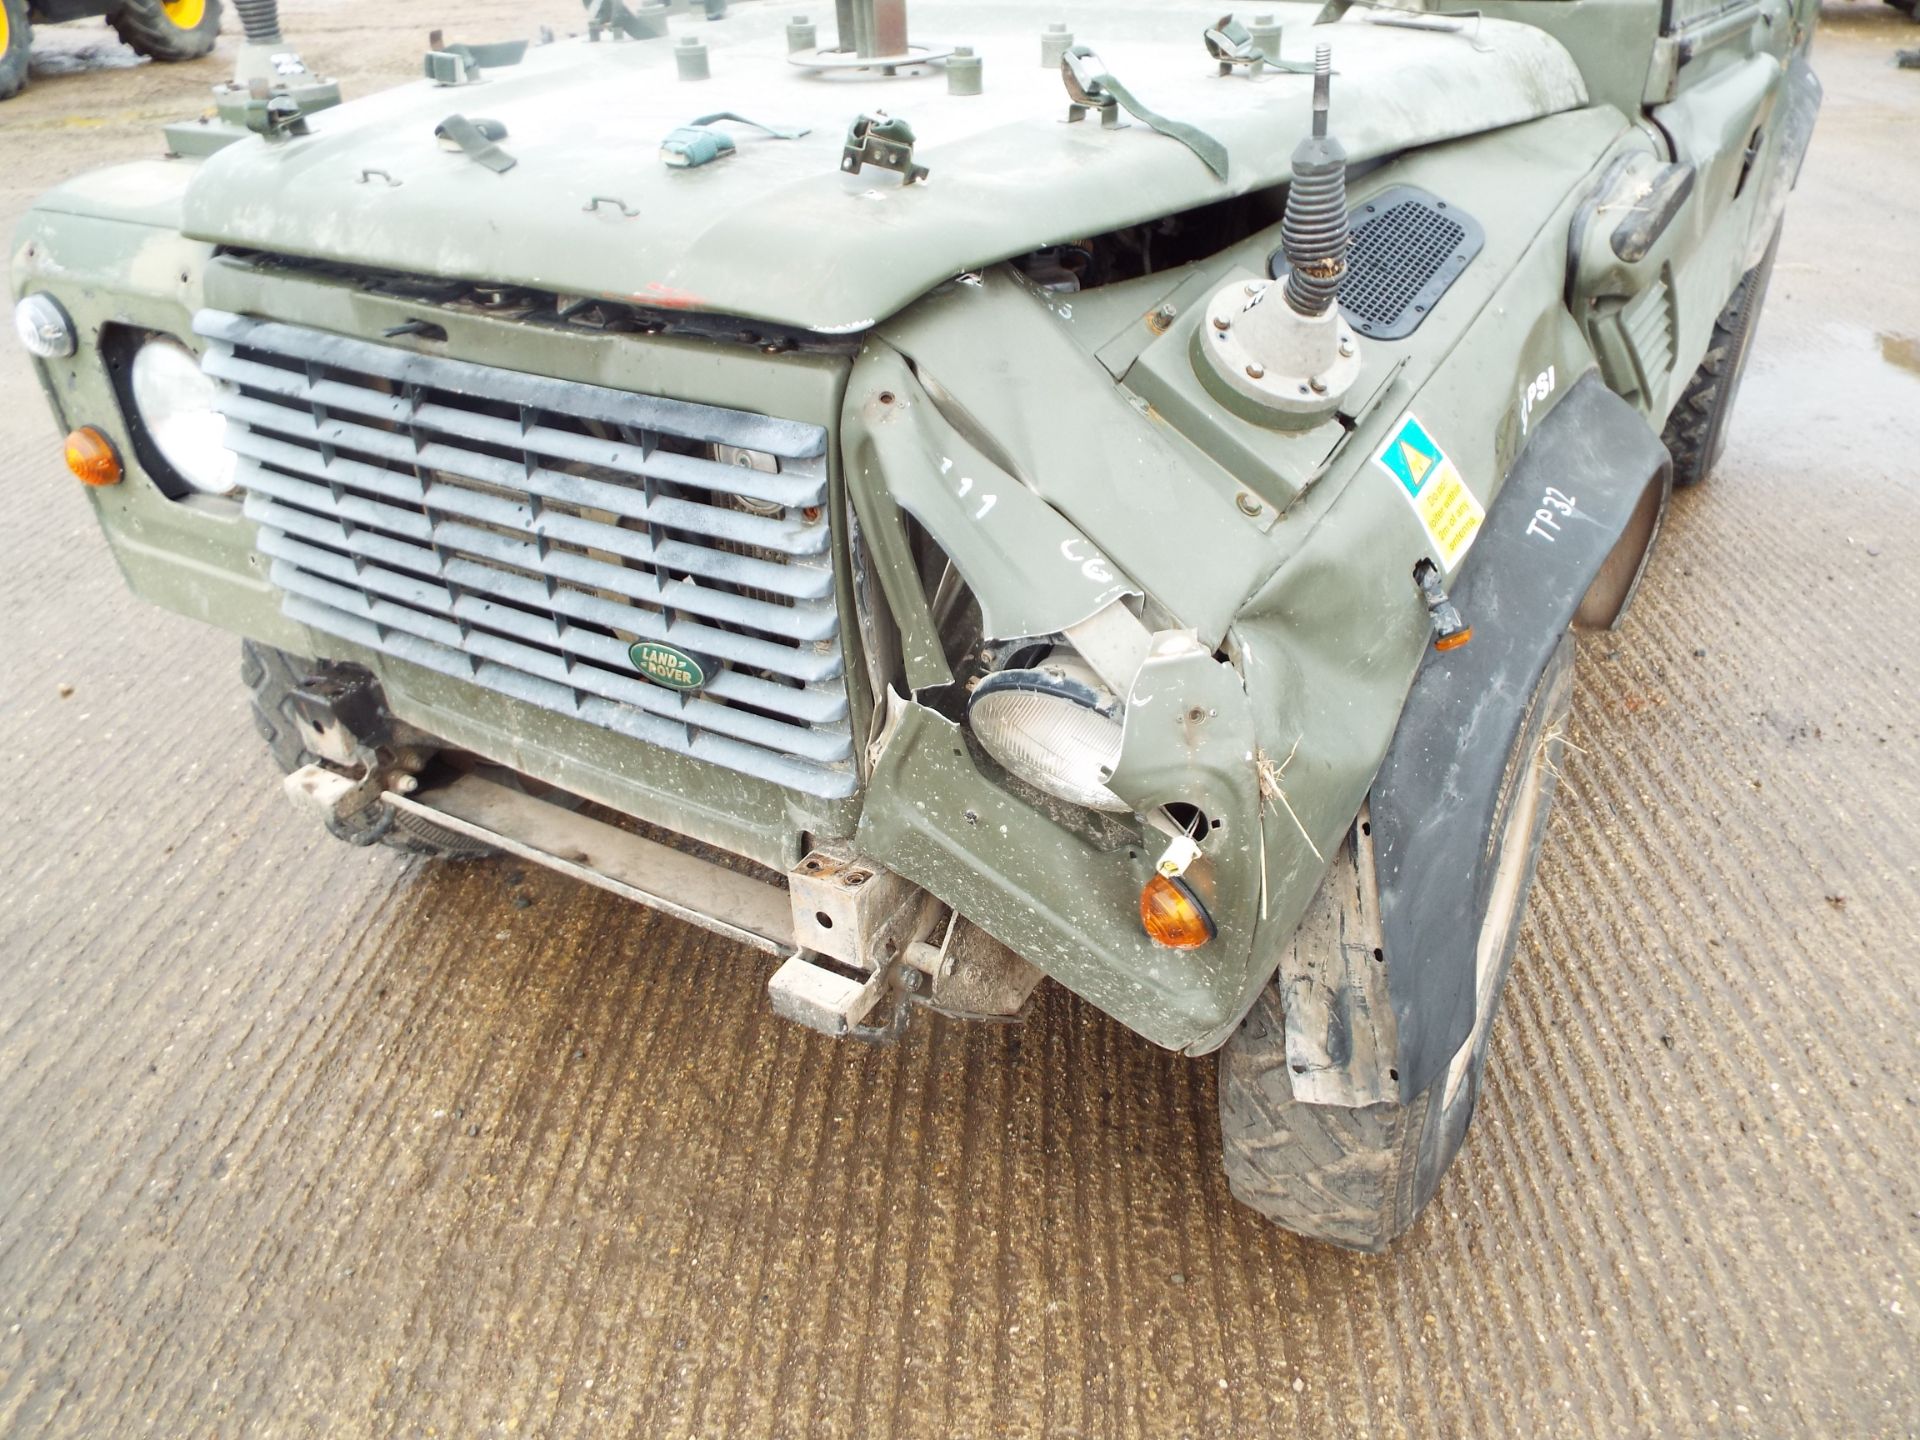 Military Specification Land Rover Wolf 110 Hard Top - Image 22 of 27